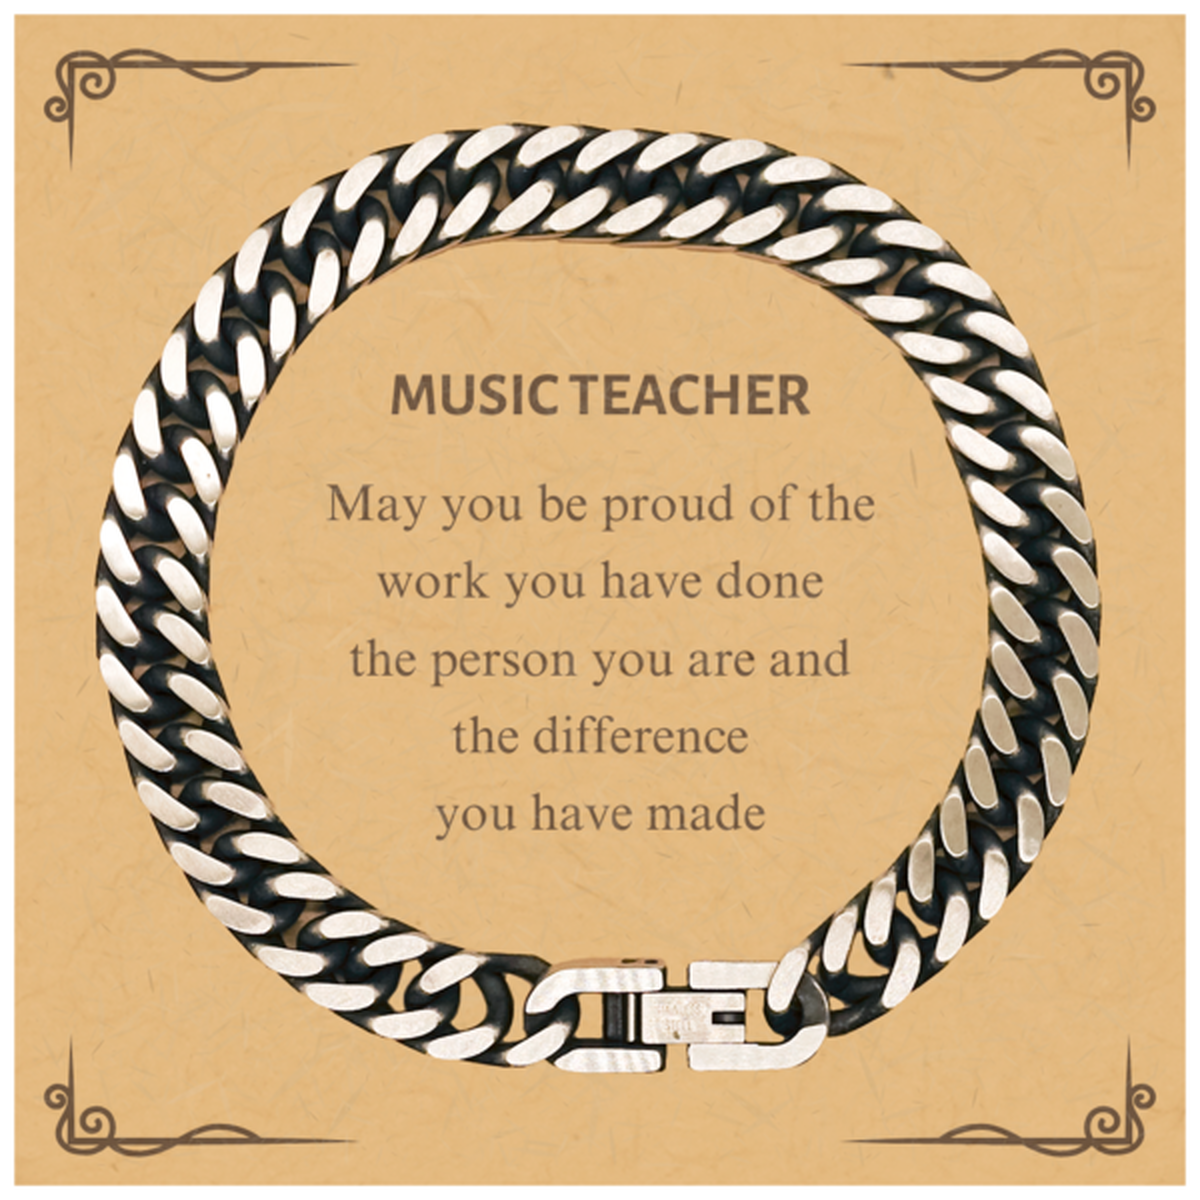 Music Teacher May you be proud of the work you have done, Retirement Music Teacher Cuban Link Chain Bracelet for Colleague Appreciation Gifts Amazing for Music Teacher